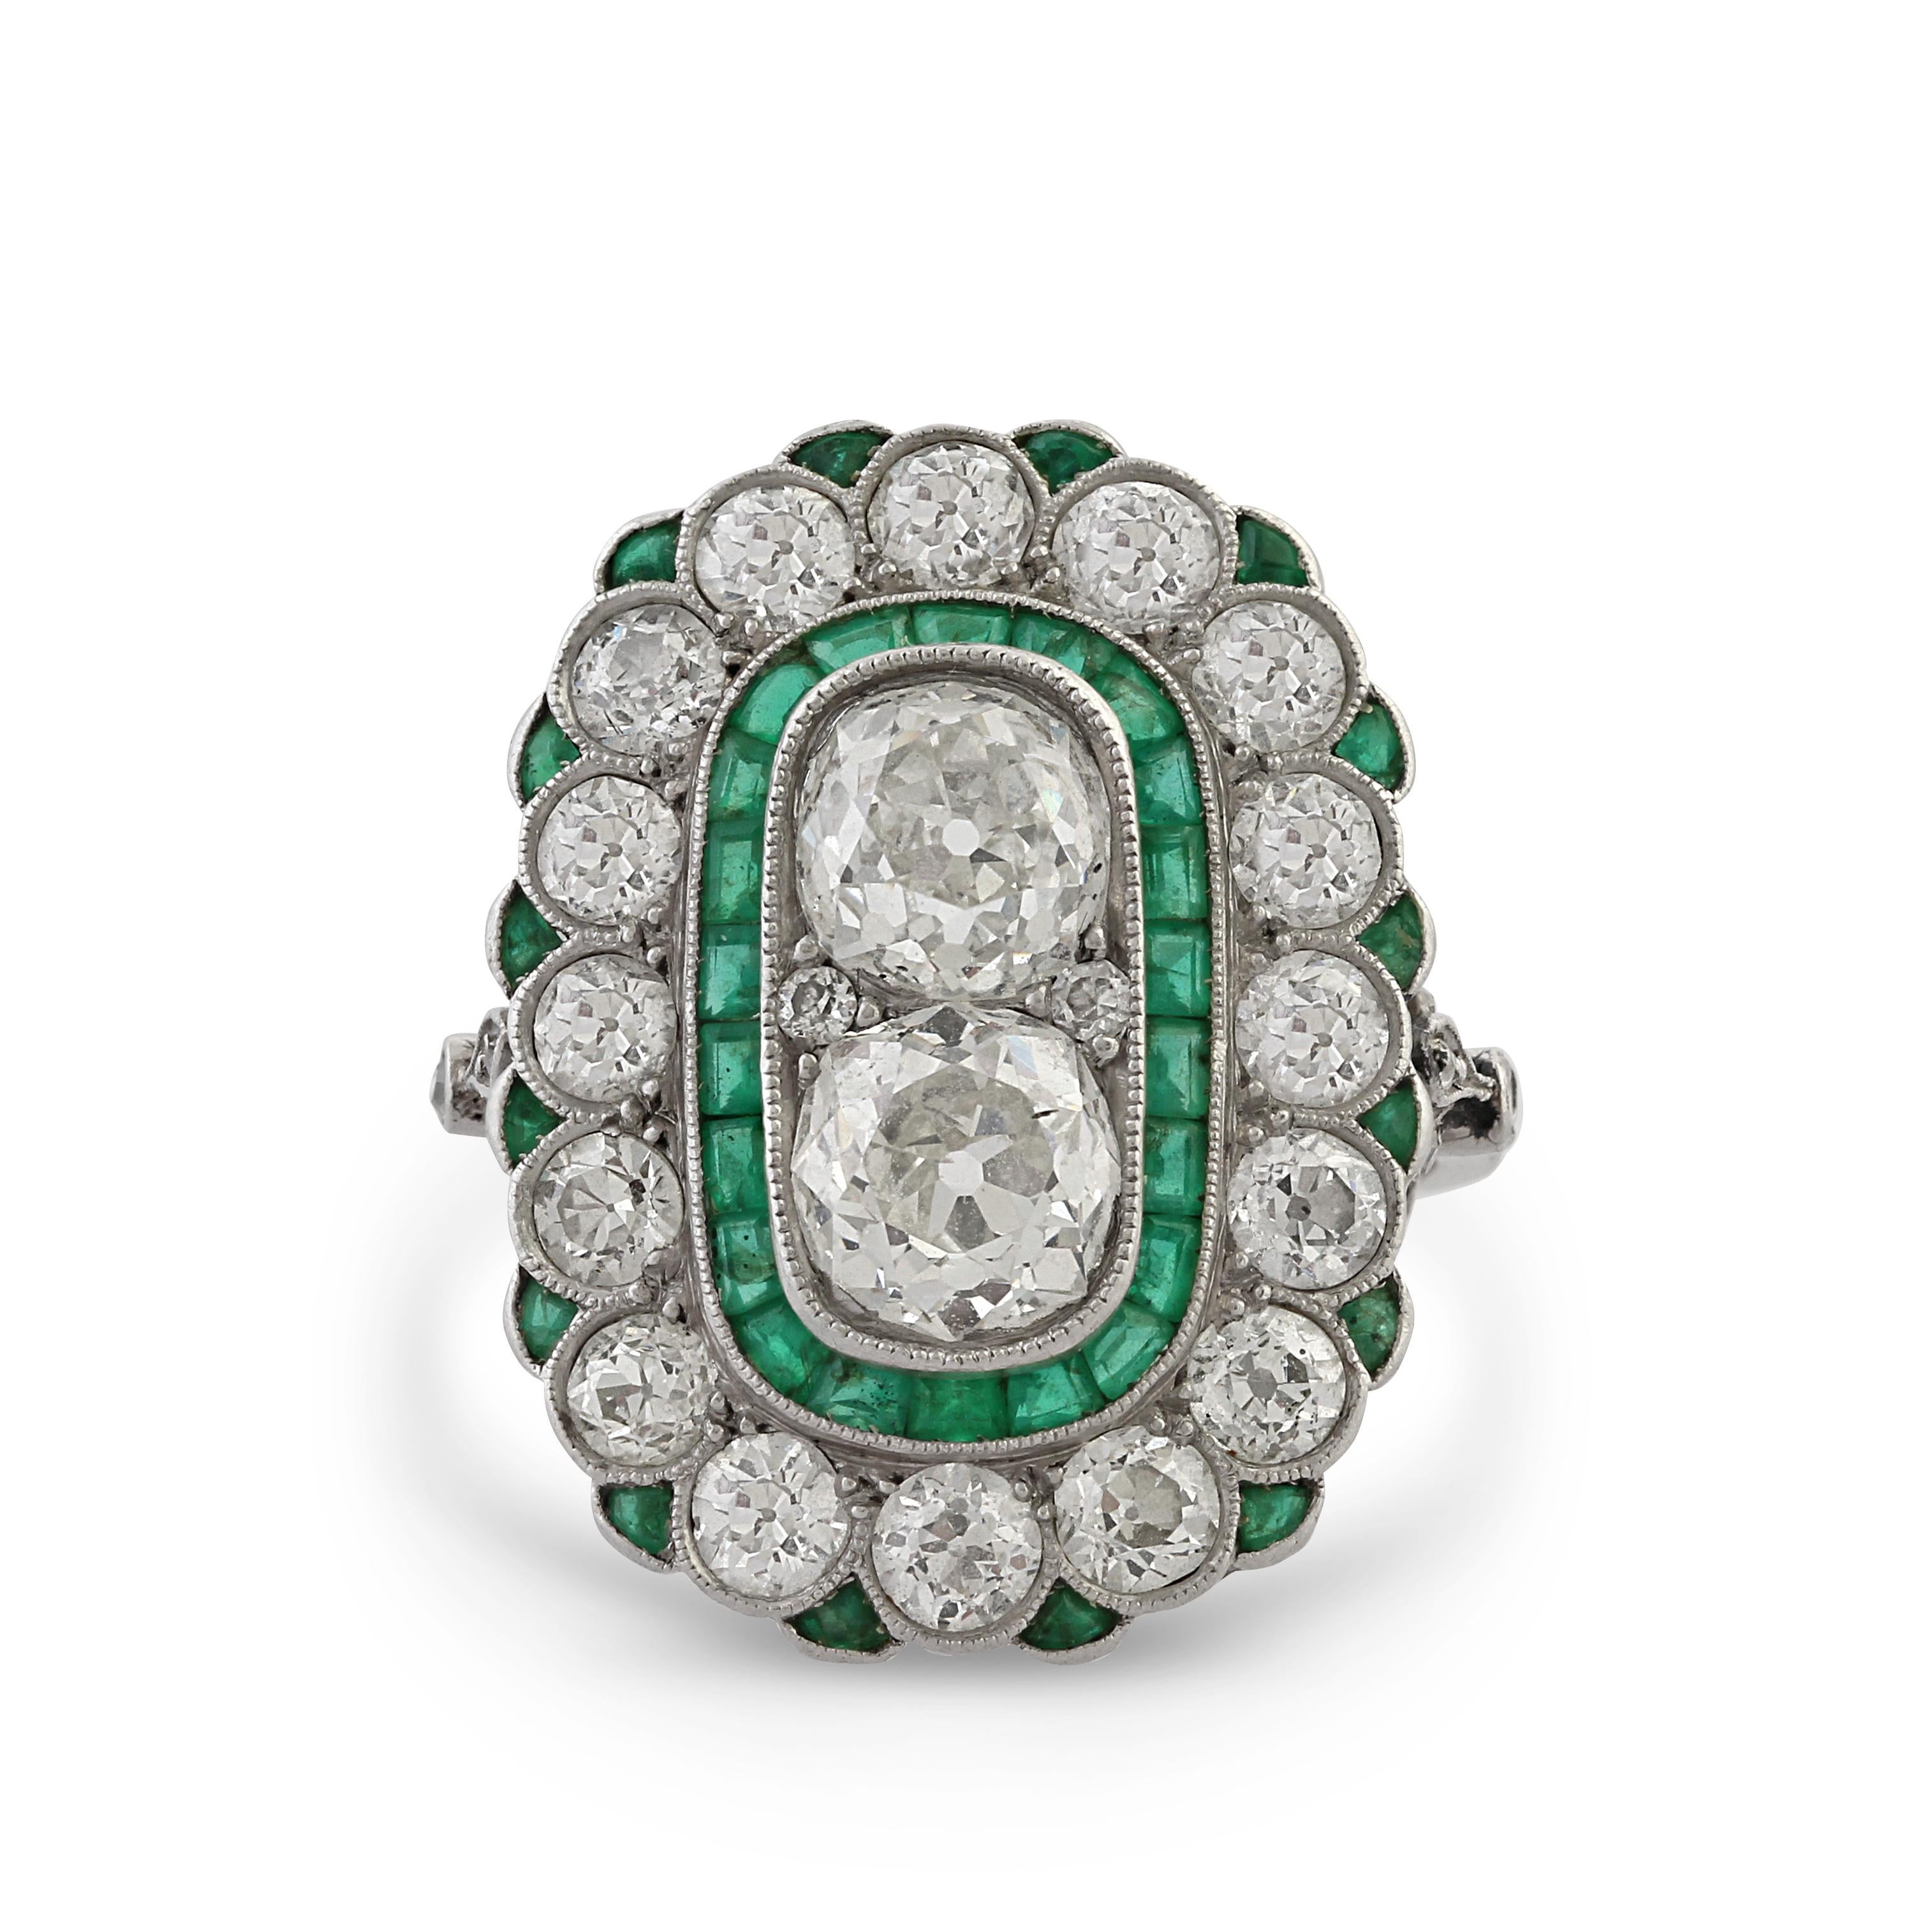 Platinum, diamond and emerald ring set with old cut diamonds. The two centre stones are approximately 2.20 carats, Colour: H/I, Clarity: VS1. Surrounded by an additional 2.15 carats of diamonds and 0.50 carats of emeralds.
